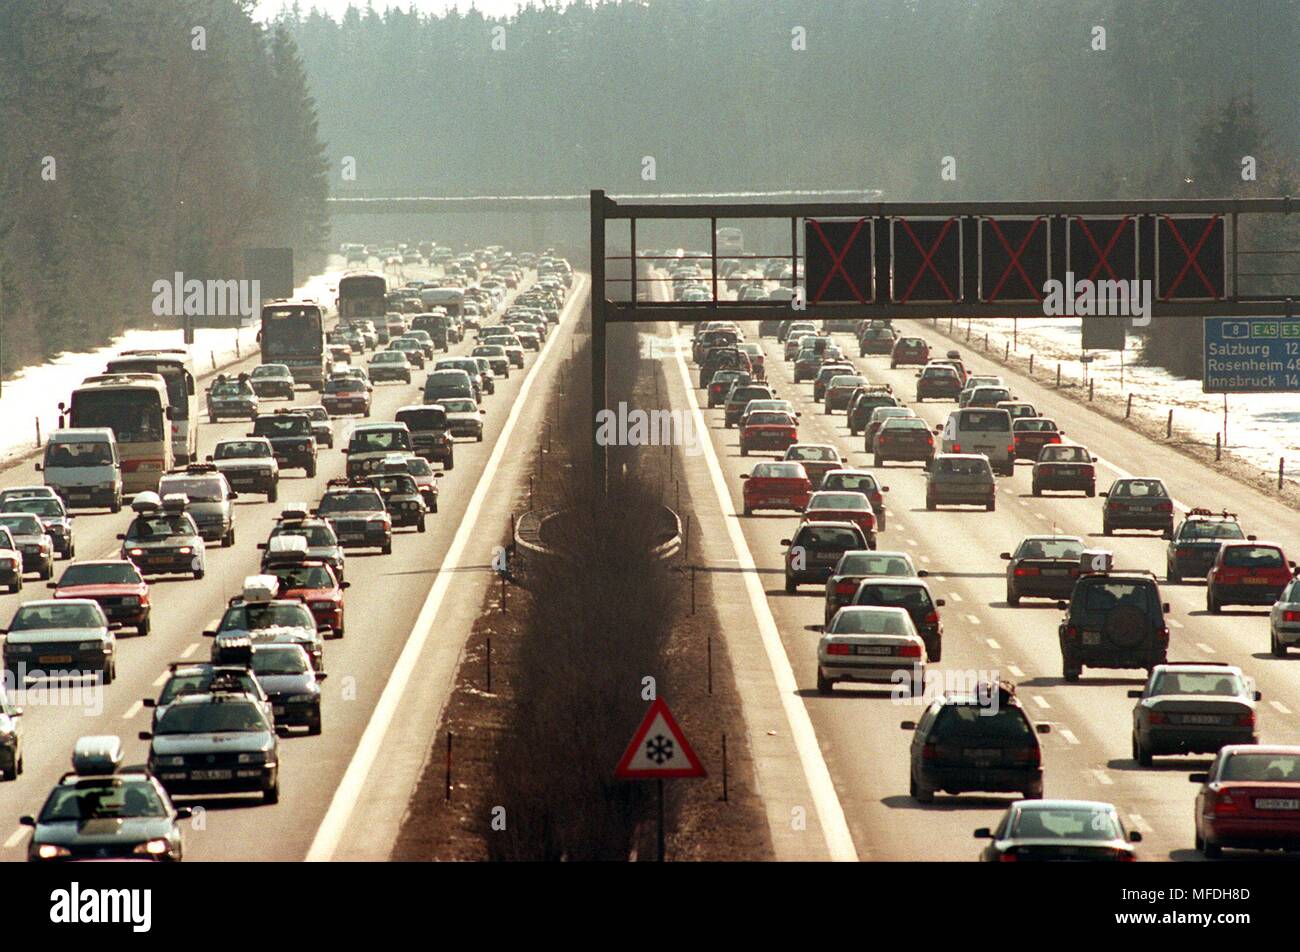 The 'shift change' among the winter holidaymakers led on 24.2.1996 on the motorway A8 Munich-Salzburg to mile-long traffic jams. Other Bavarian motorways also reported disabilities because of heavy traffic. | usage worldwide Stock Photo